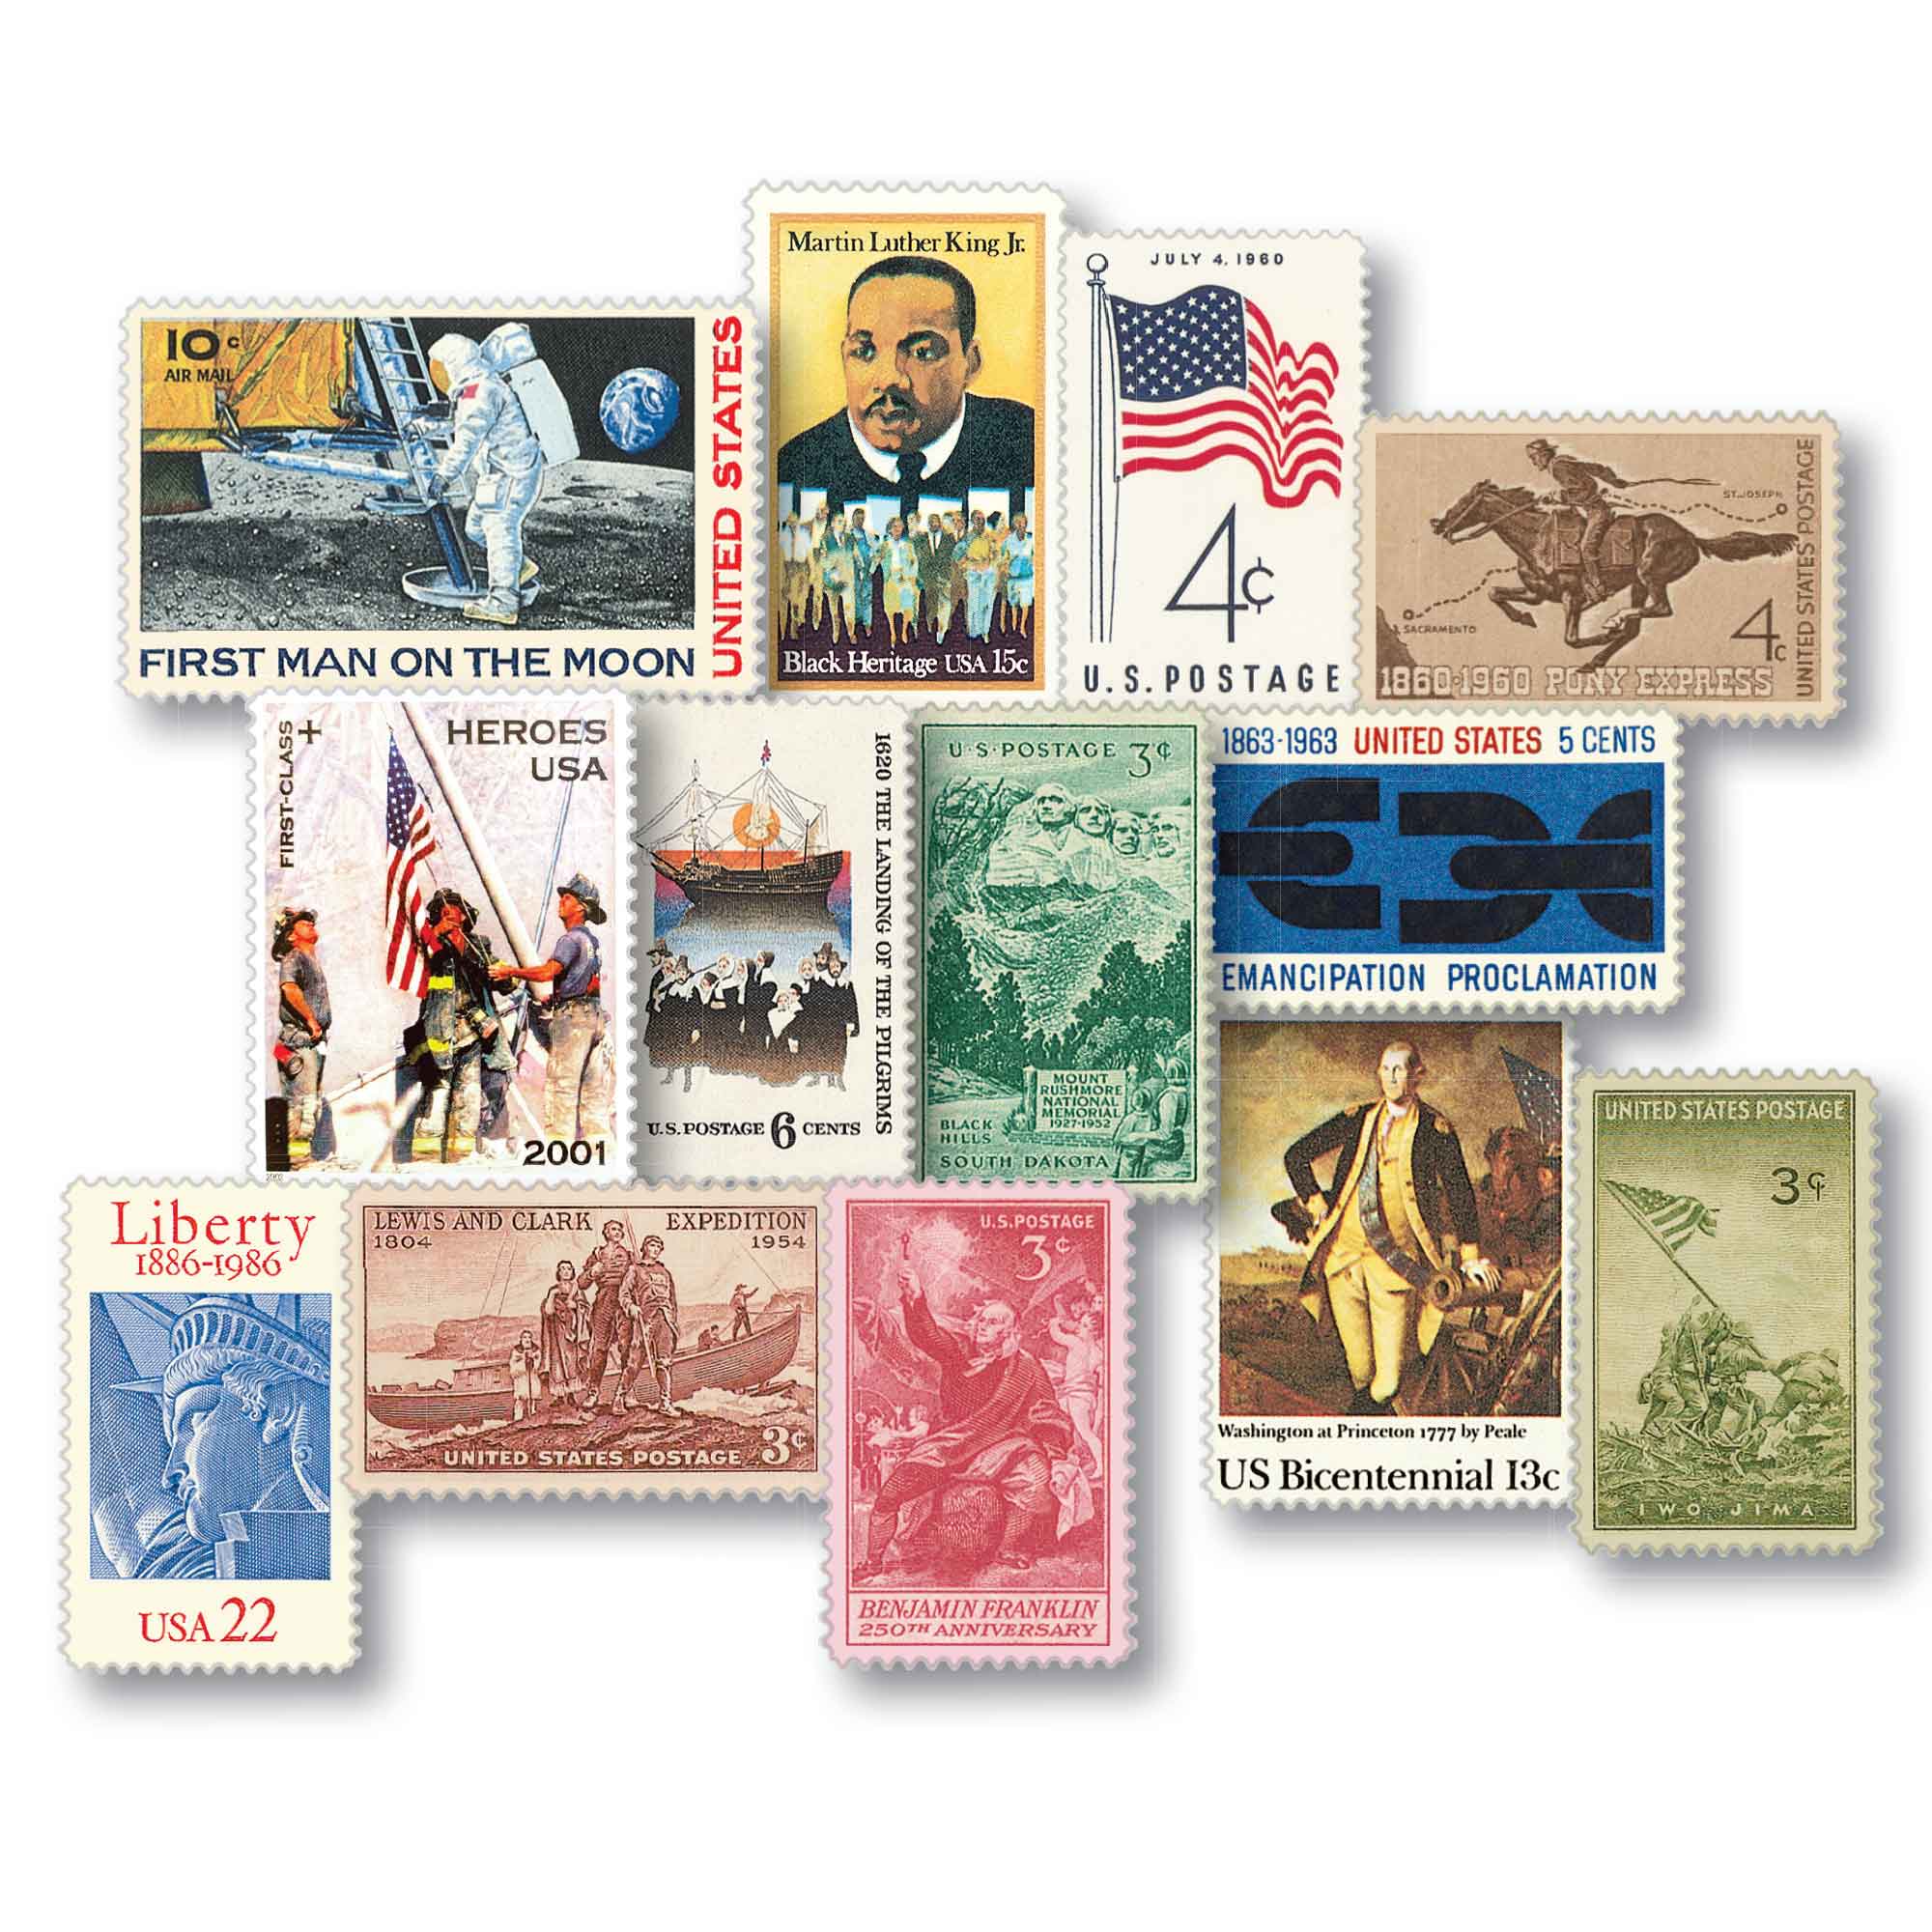 1963 STAMP YEAR SET (ALL U.S. POSTAGE STAMPS ISSUED THAT YEAR) - MINT  CONDITION